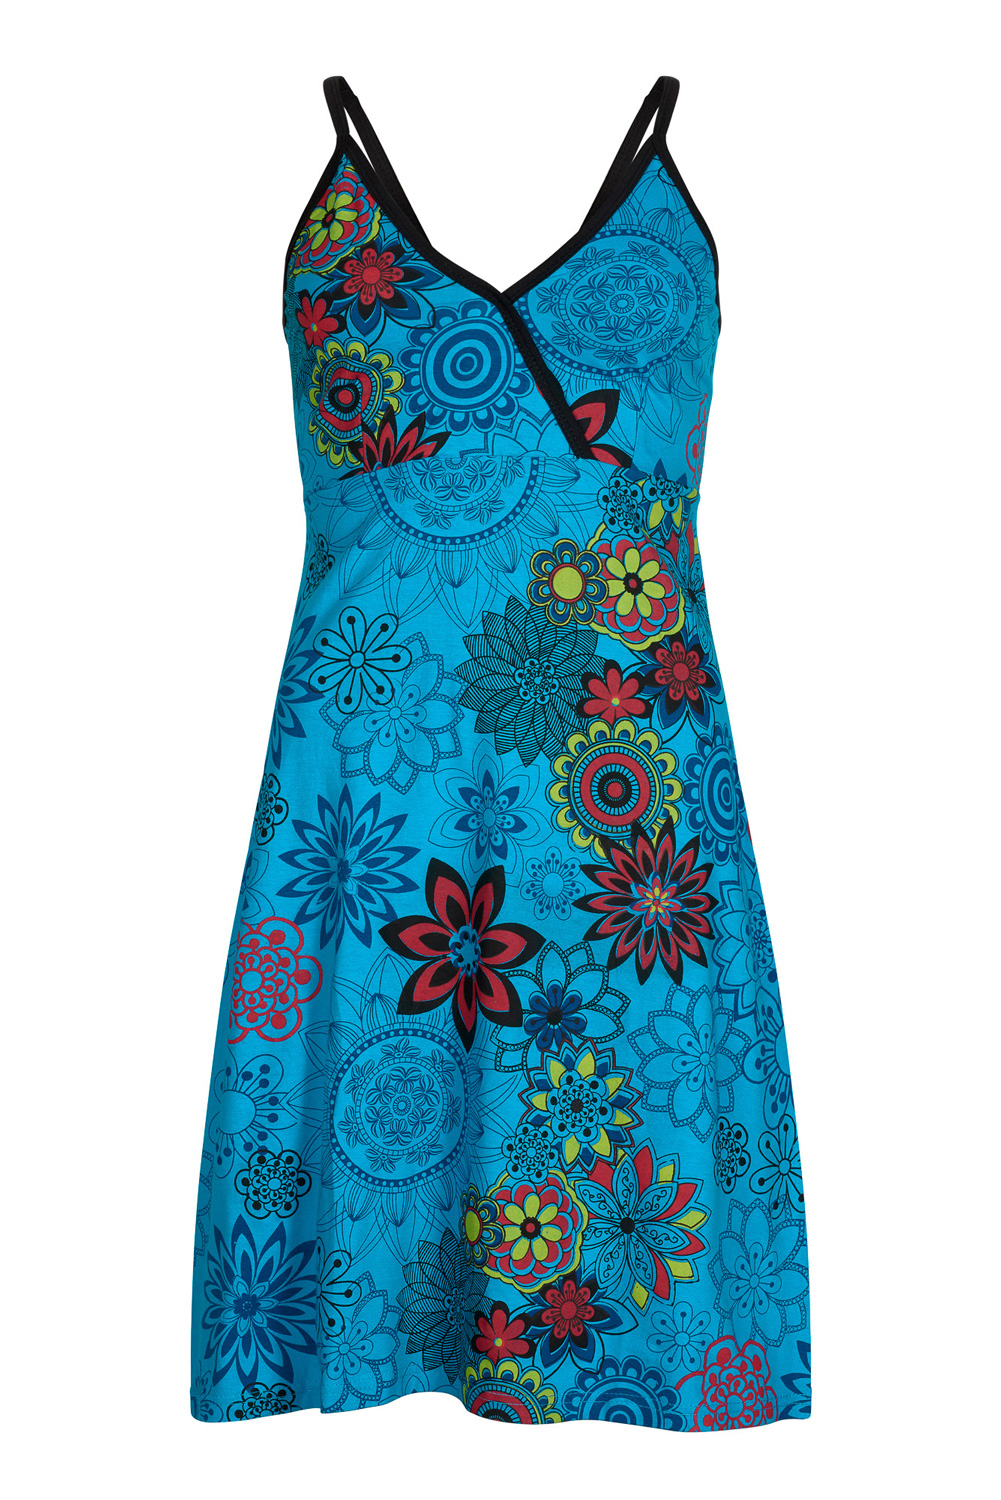 Wicked Dragon Clothing - Floral summer strappy dress